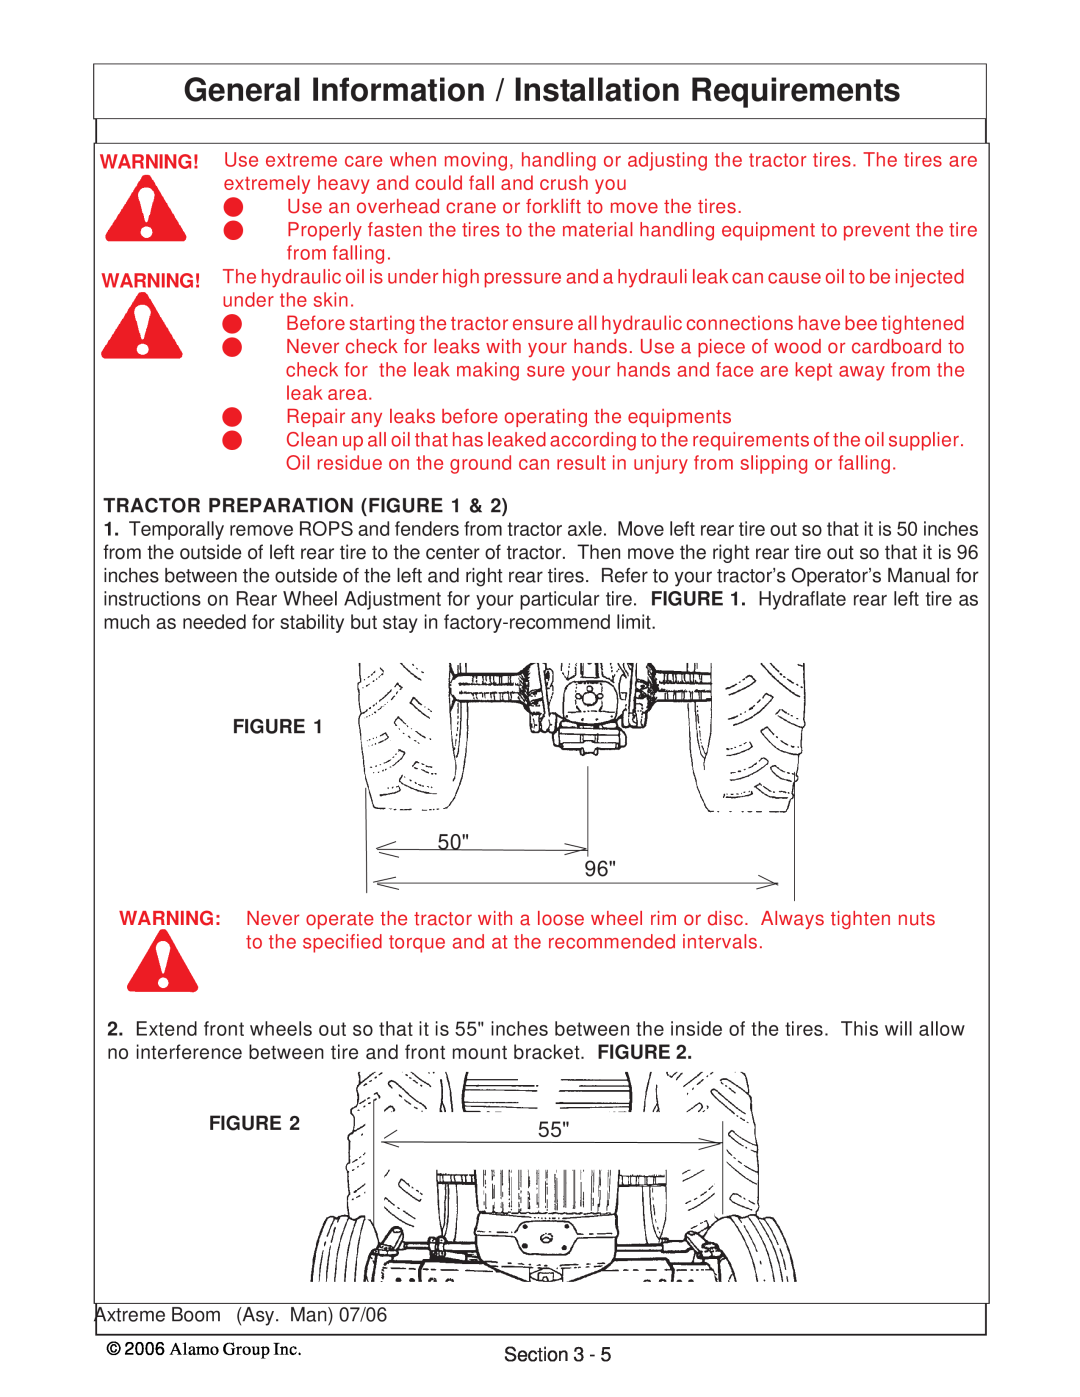 Alamo 02984405 instruction manual General Information / Installation Requirements, Tractor Preparation 